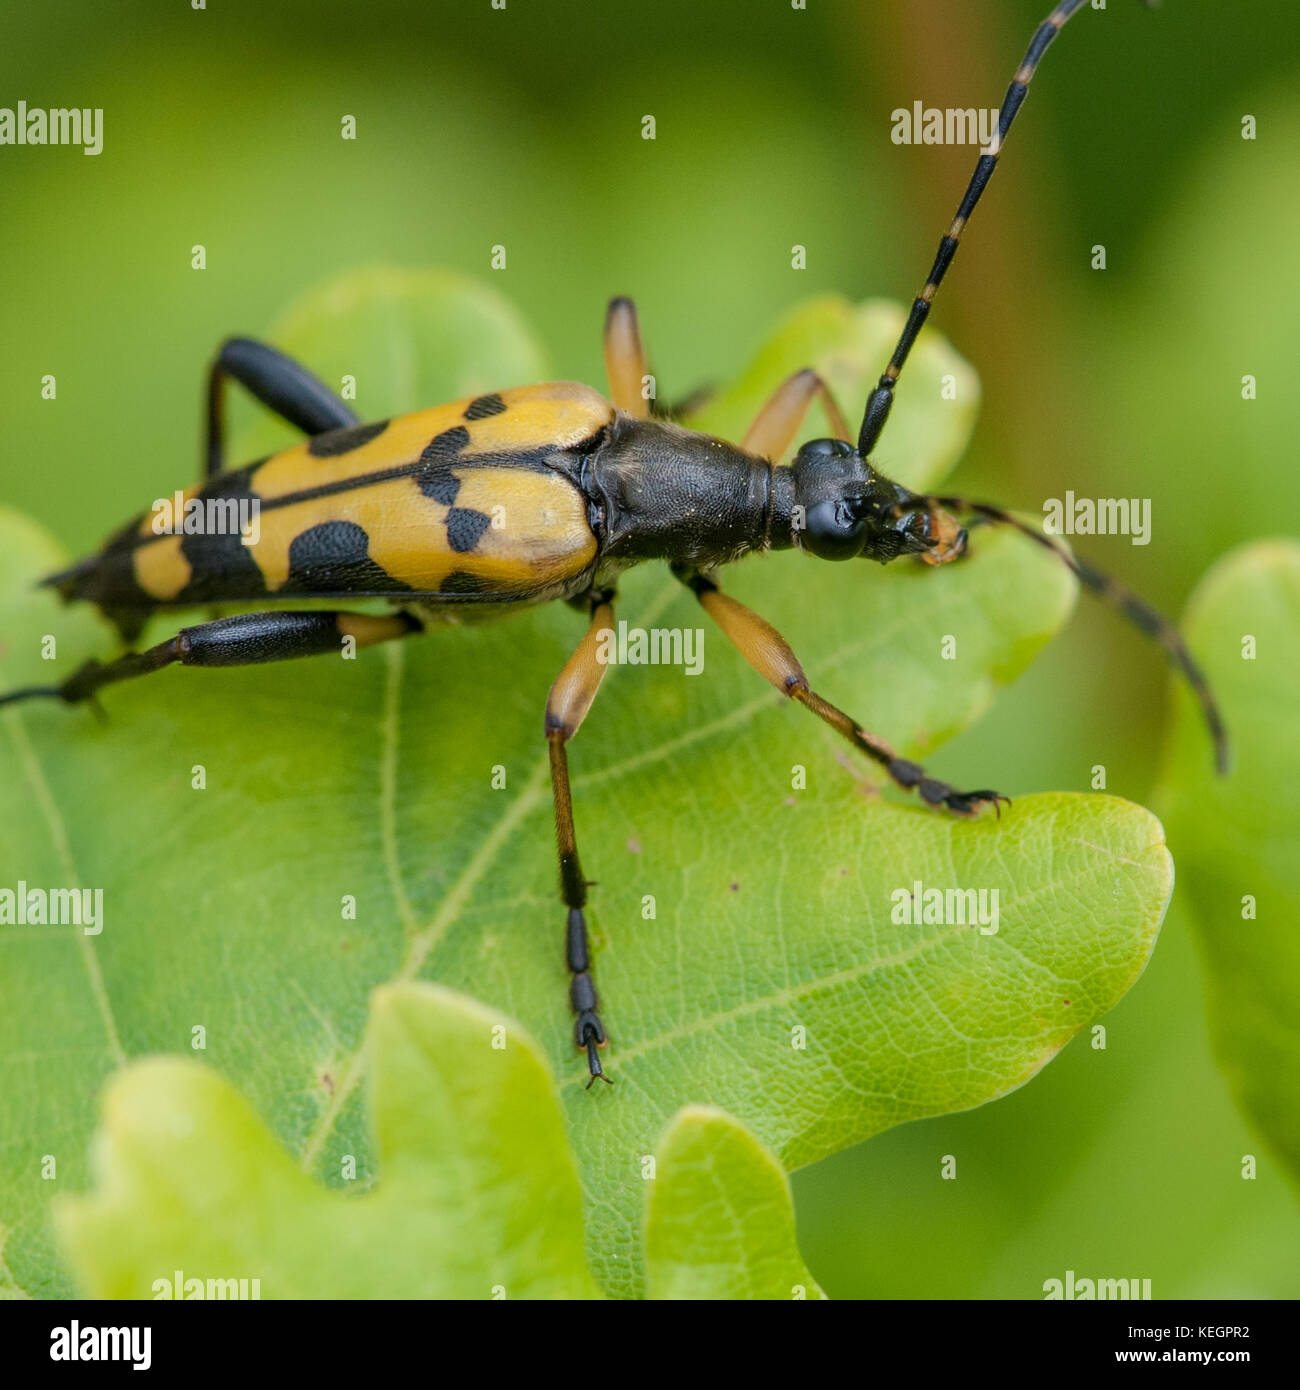 A longhorn beetle makes its way through the leaves of an oak tree. Stock Photo